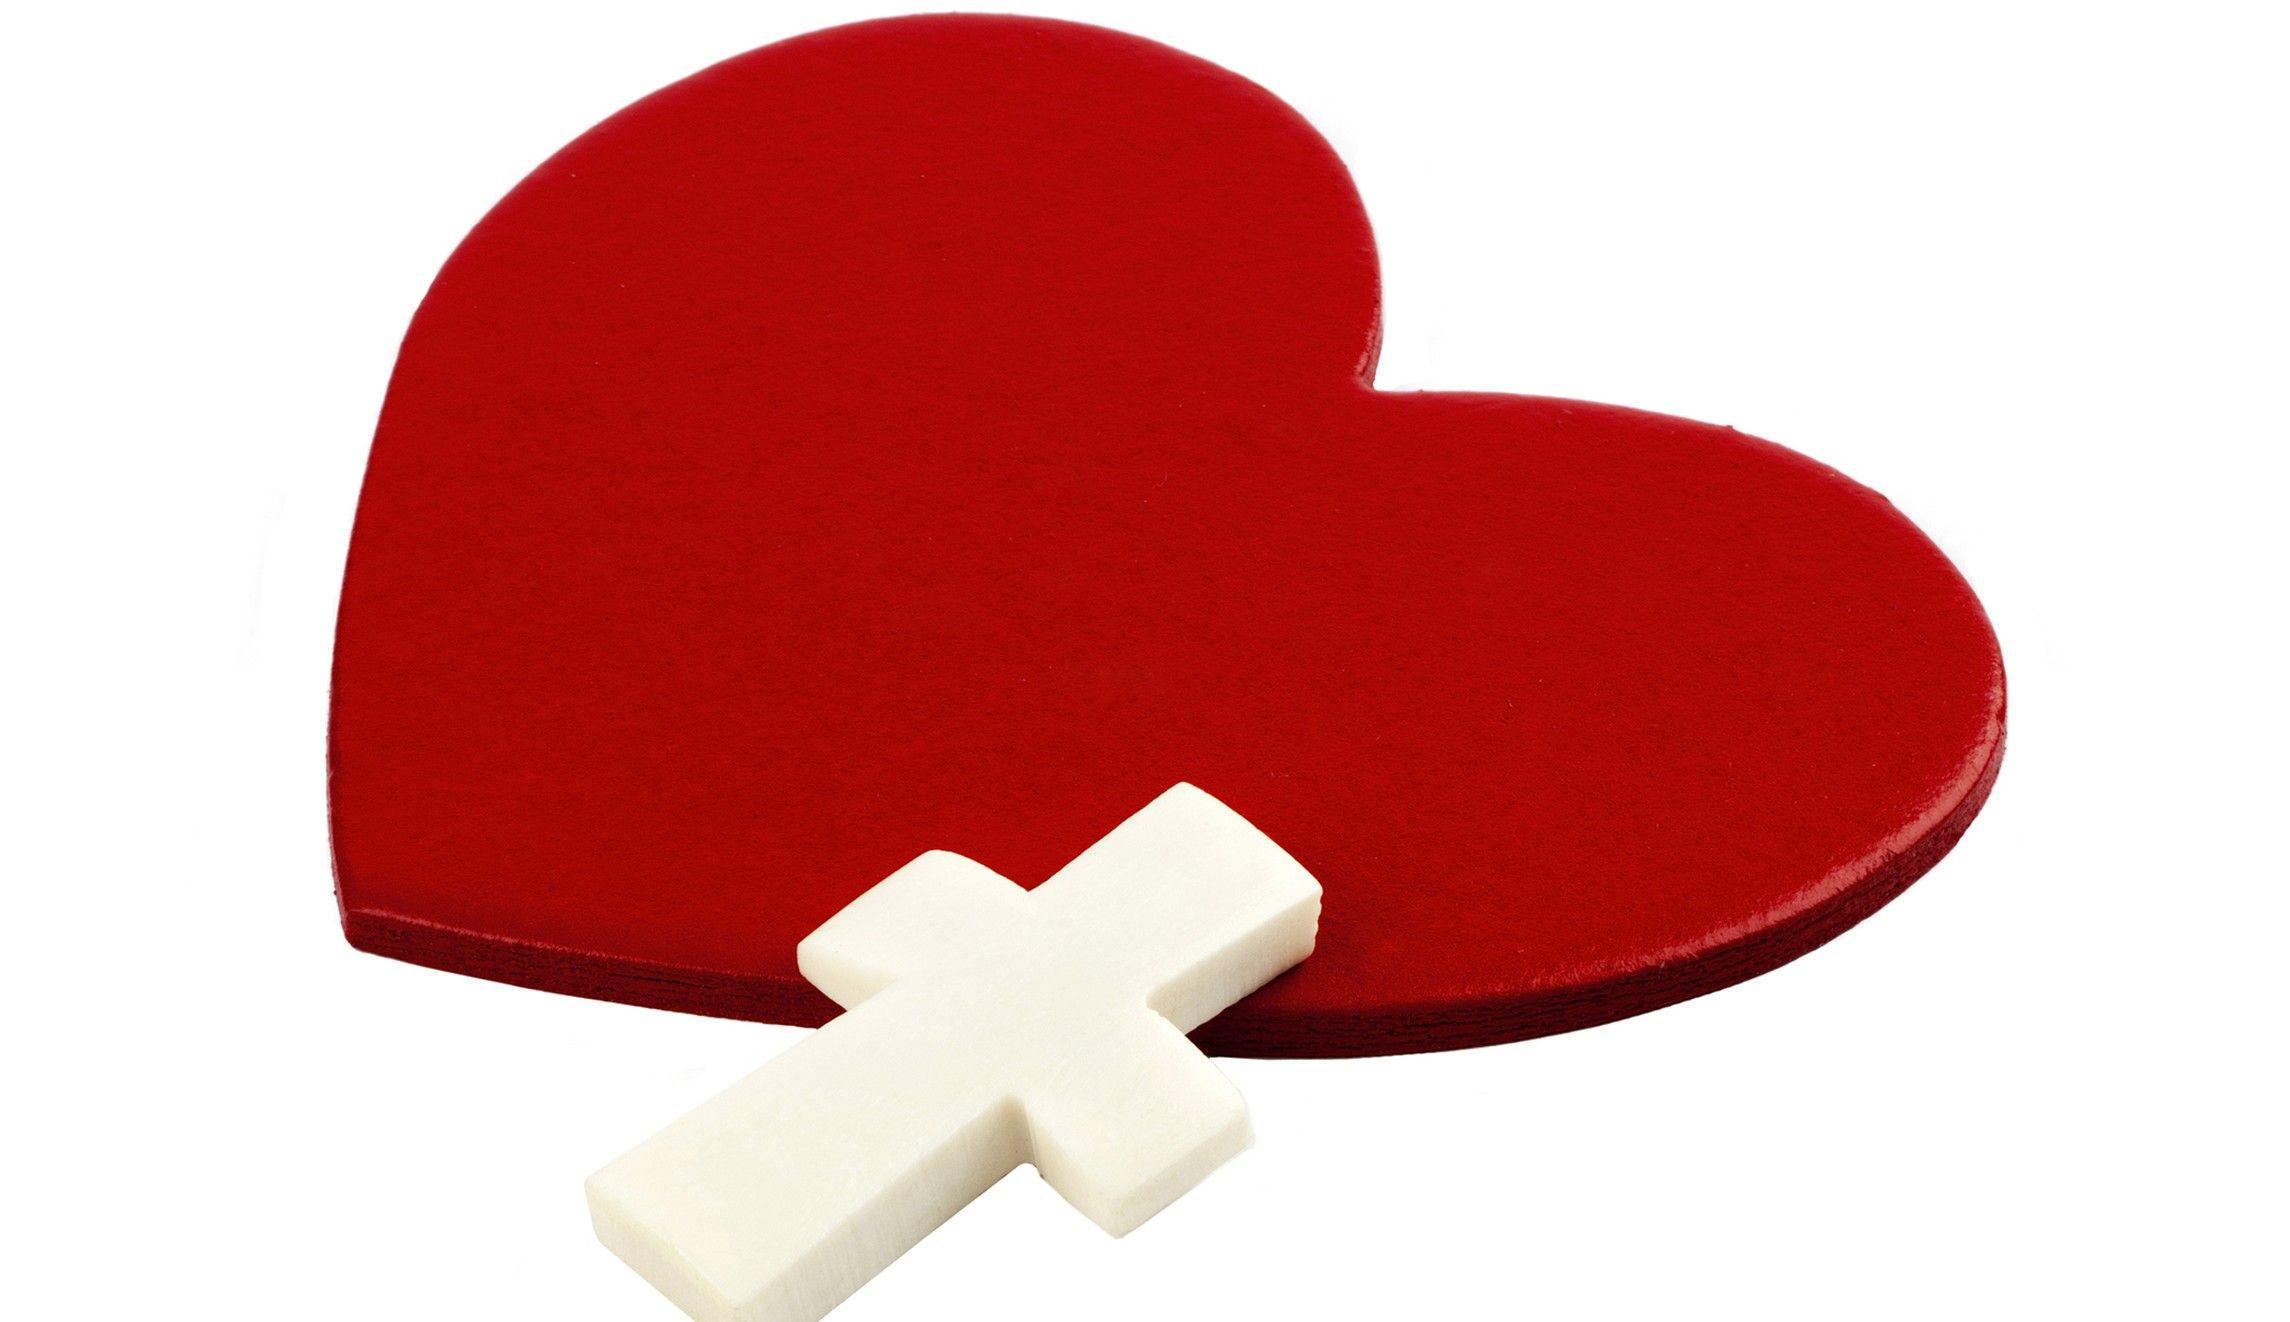 Red Heart with White Cross Logo - After controversy over Christian Valentines, student sues Wisconsin